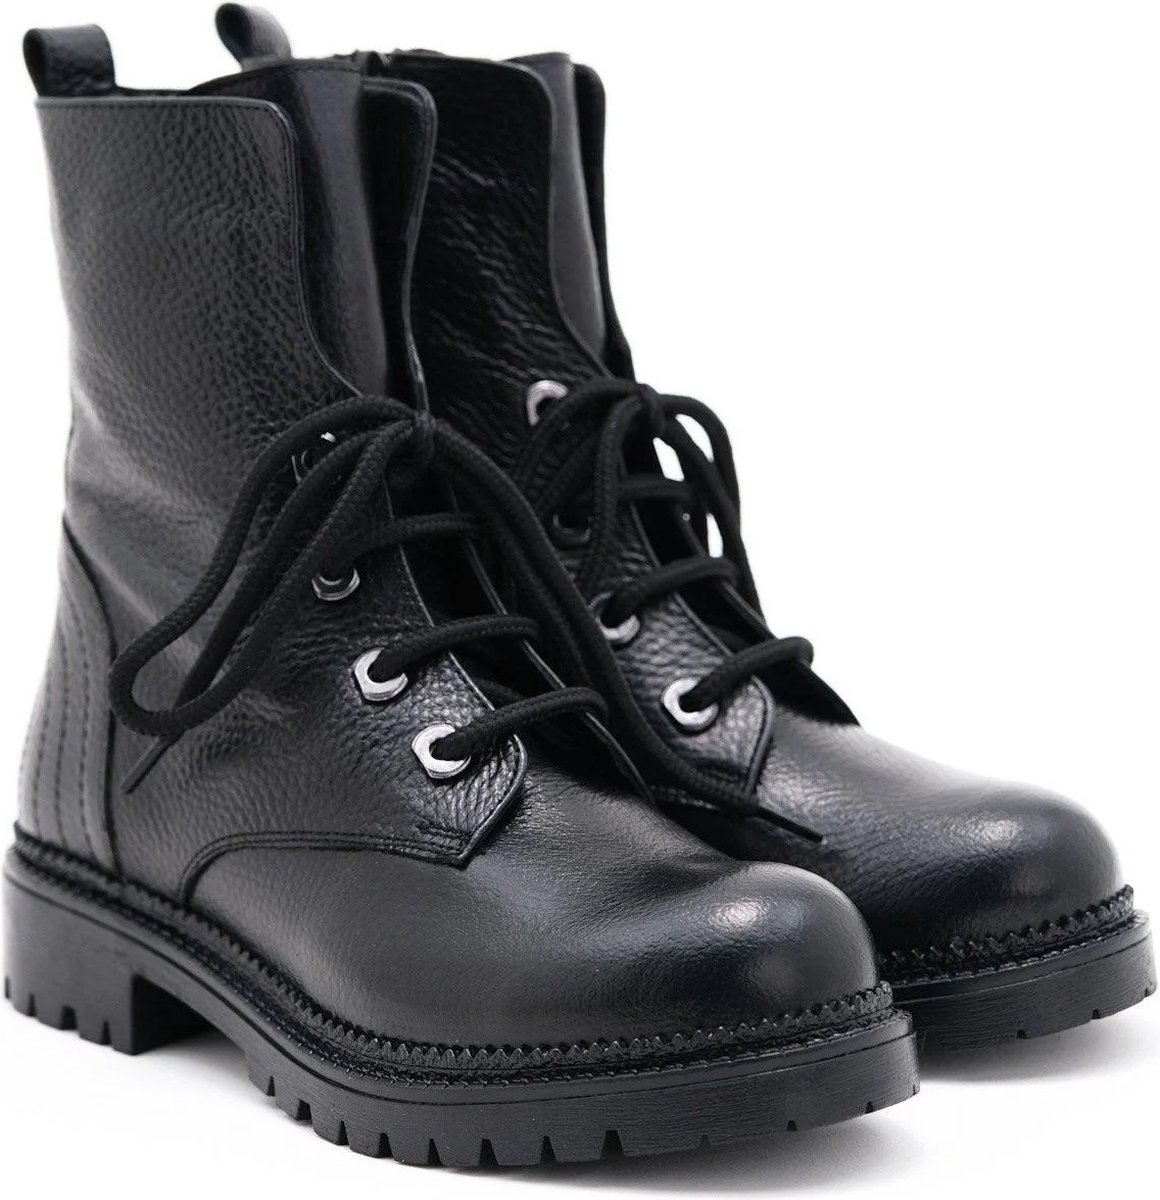 Athene Black Boots Real Leather